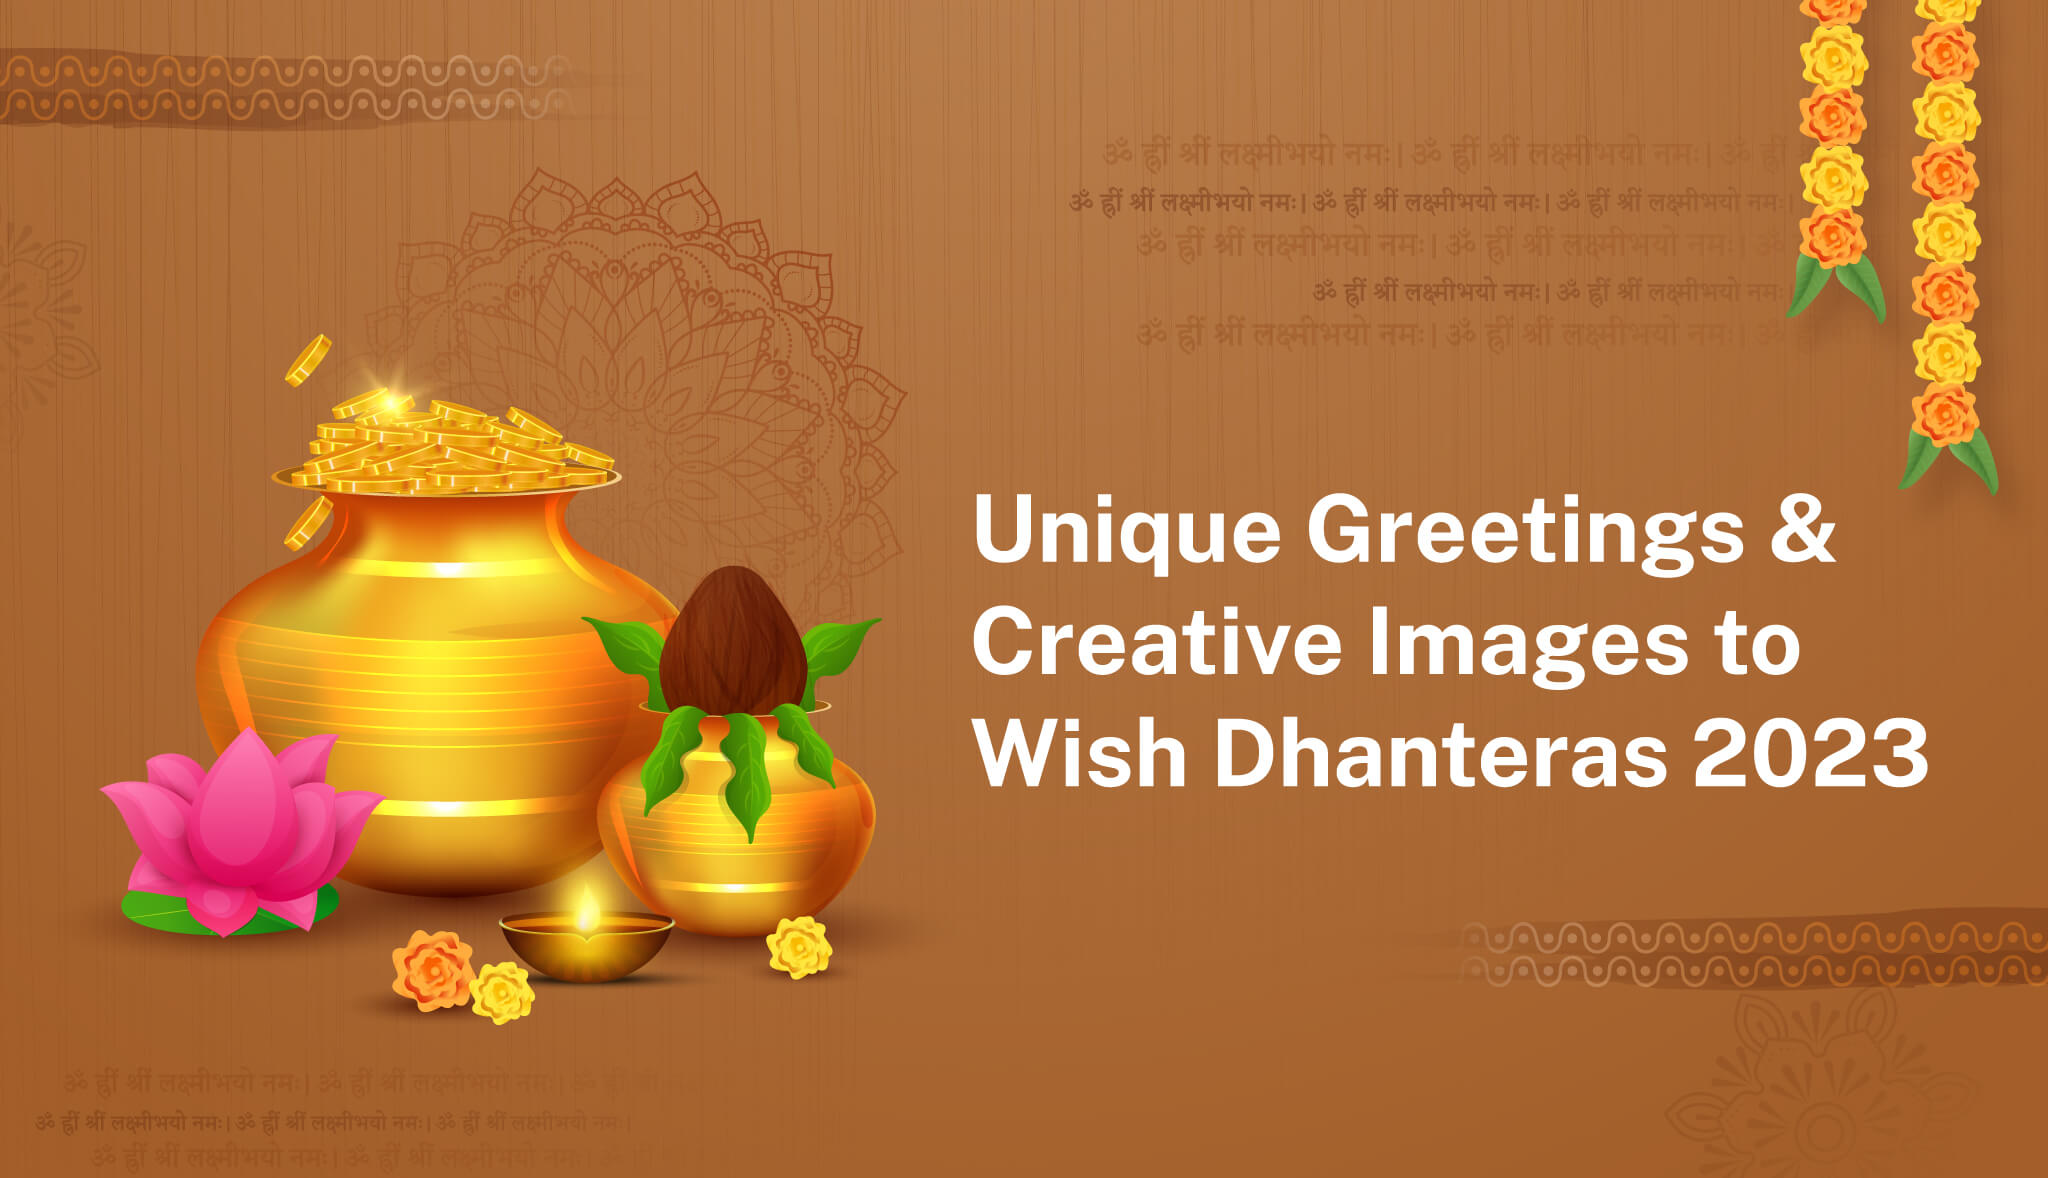 Unique greetings and creative images to wish Dhanteras 2023 - Postive